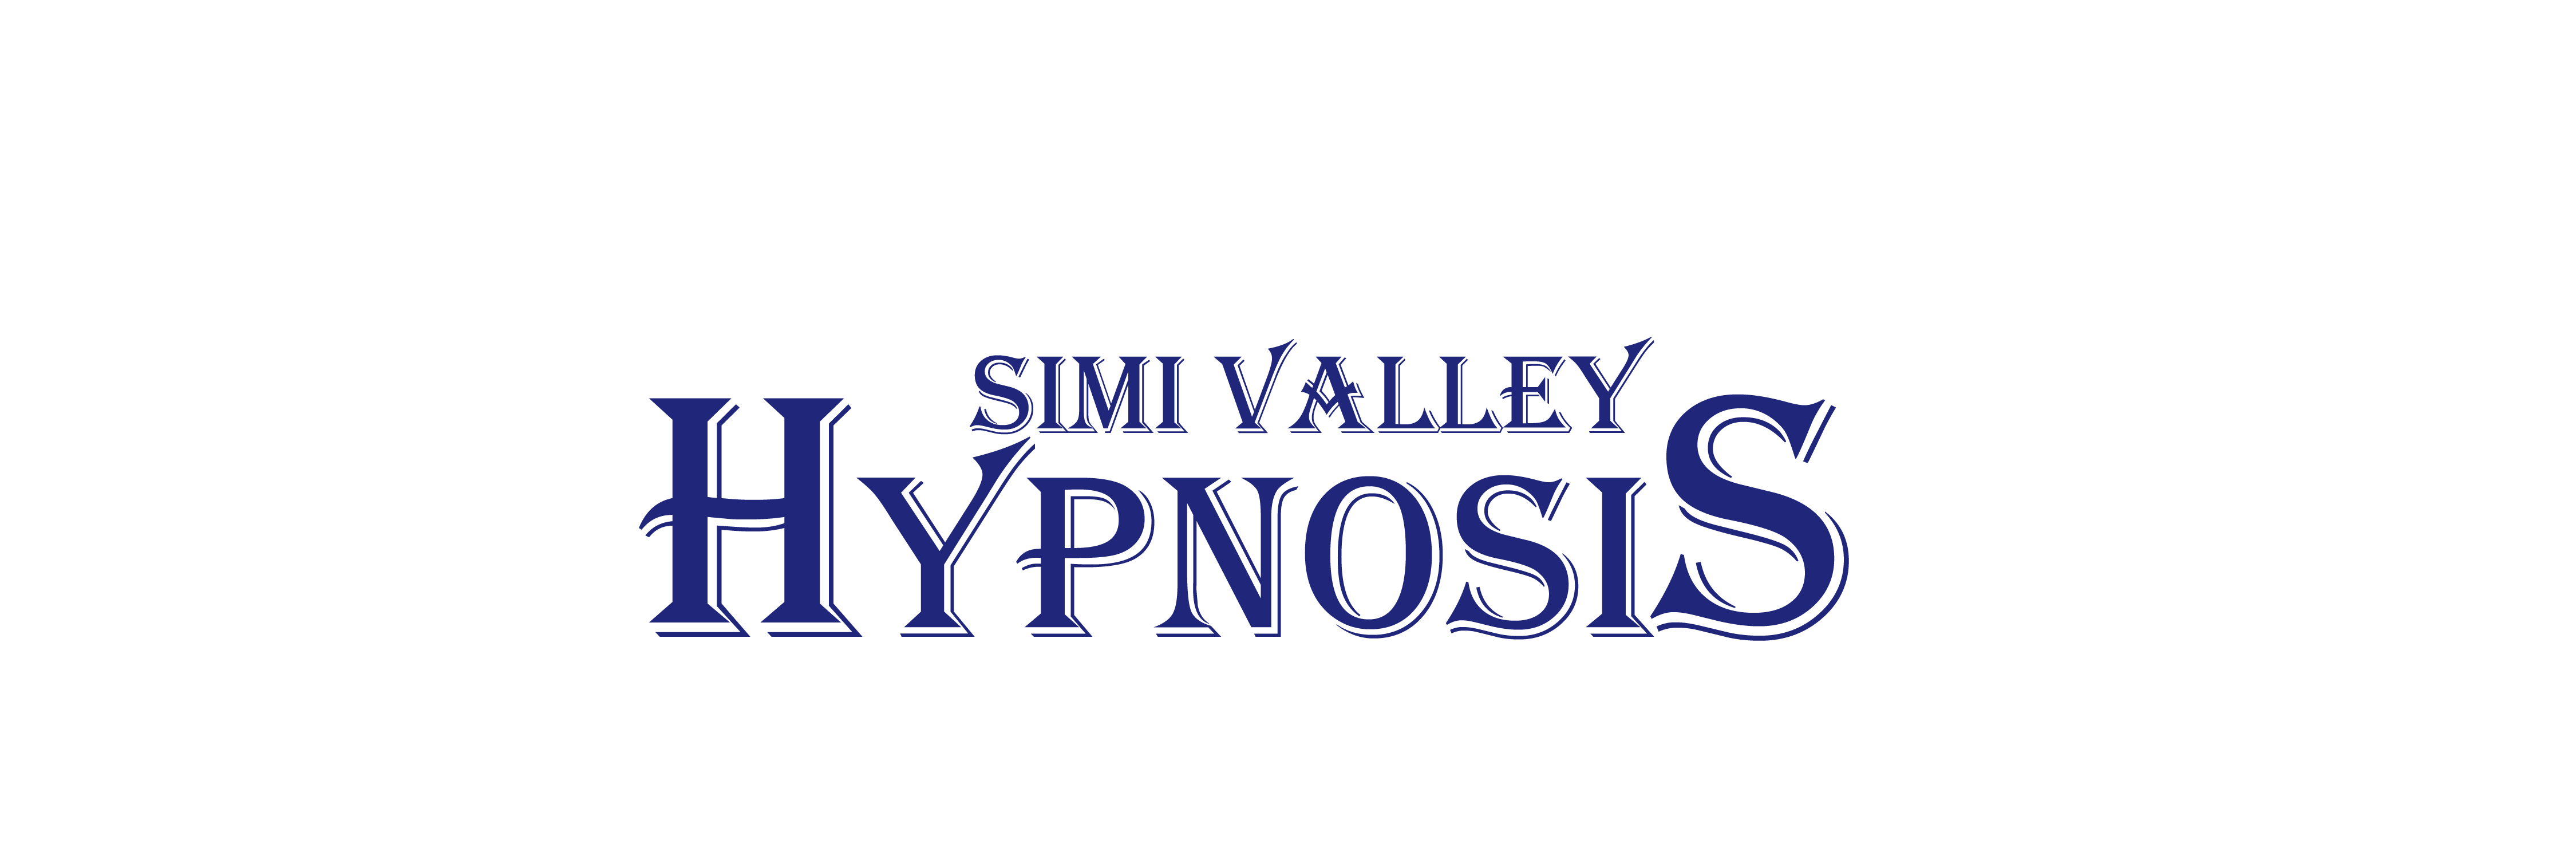 Successful Hypnosis programs for weight loss, smoking cessation, and stress reduction in Simi Valley, CA